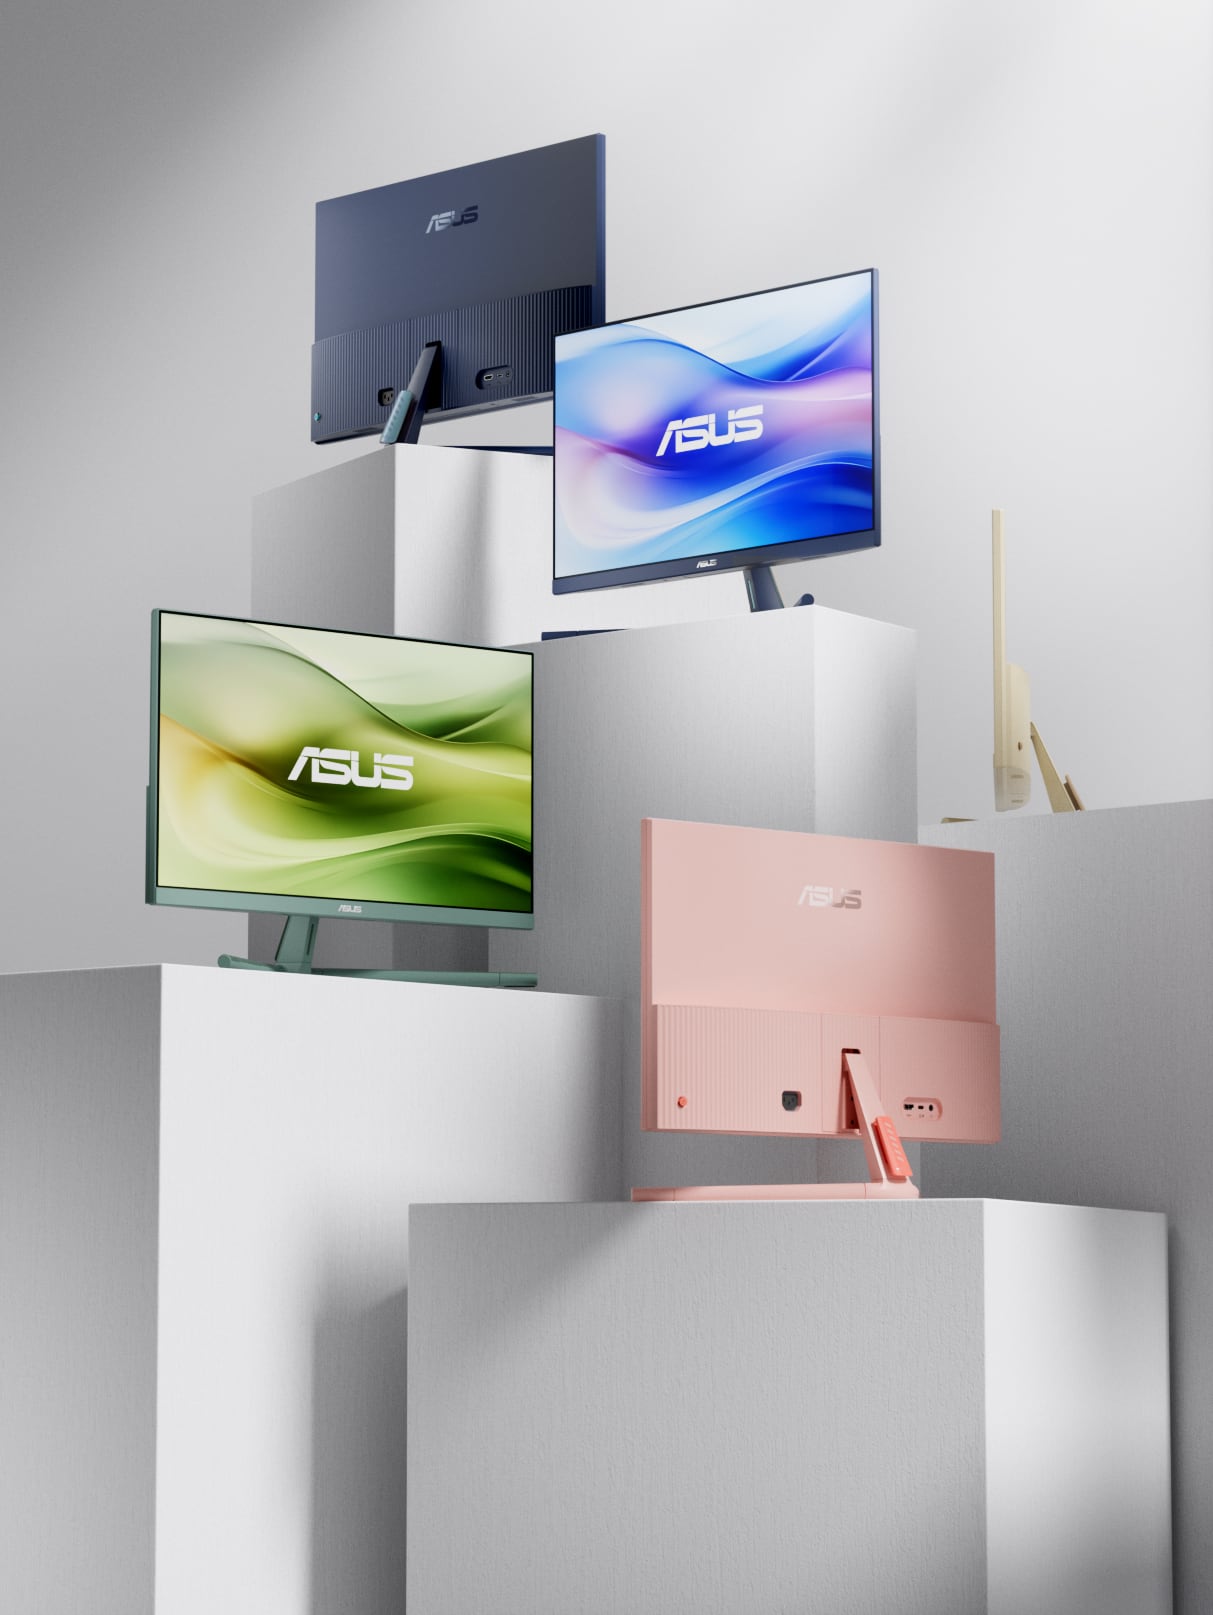 Image showing the four available colors for the VU monitor range